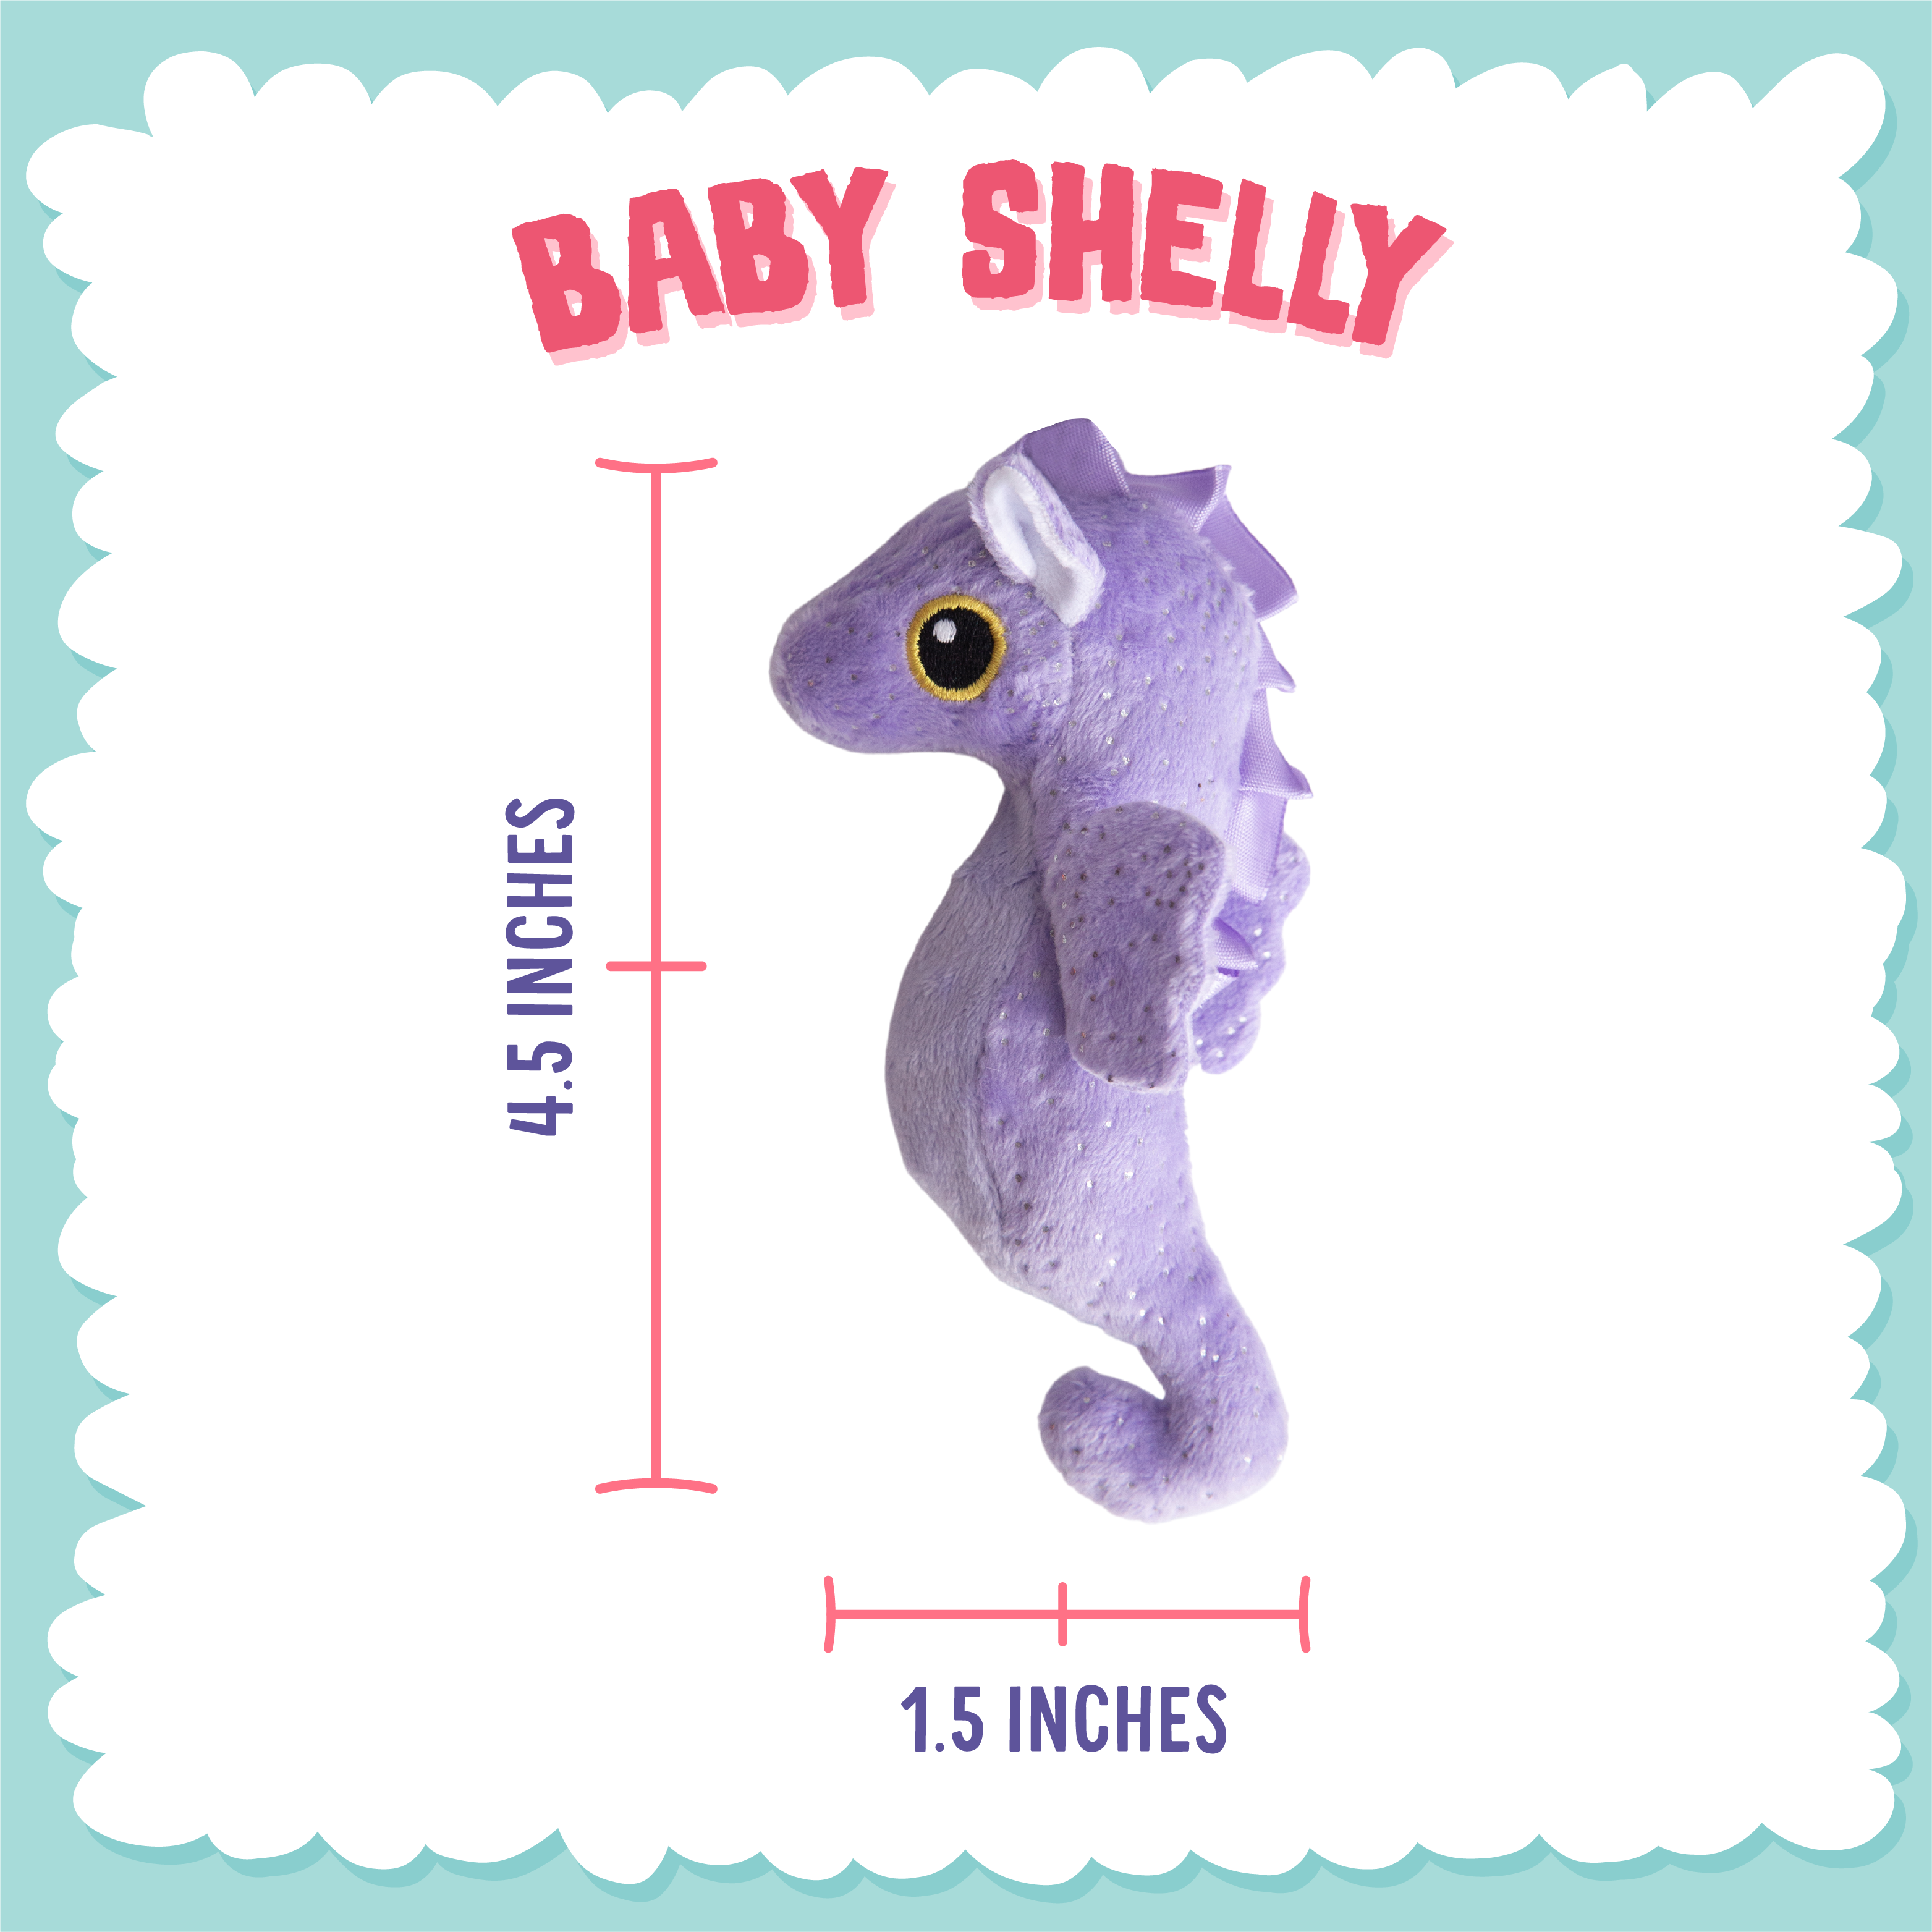 Baby Shelly